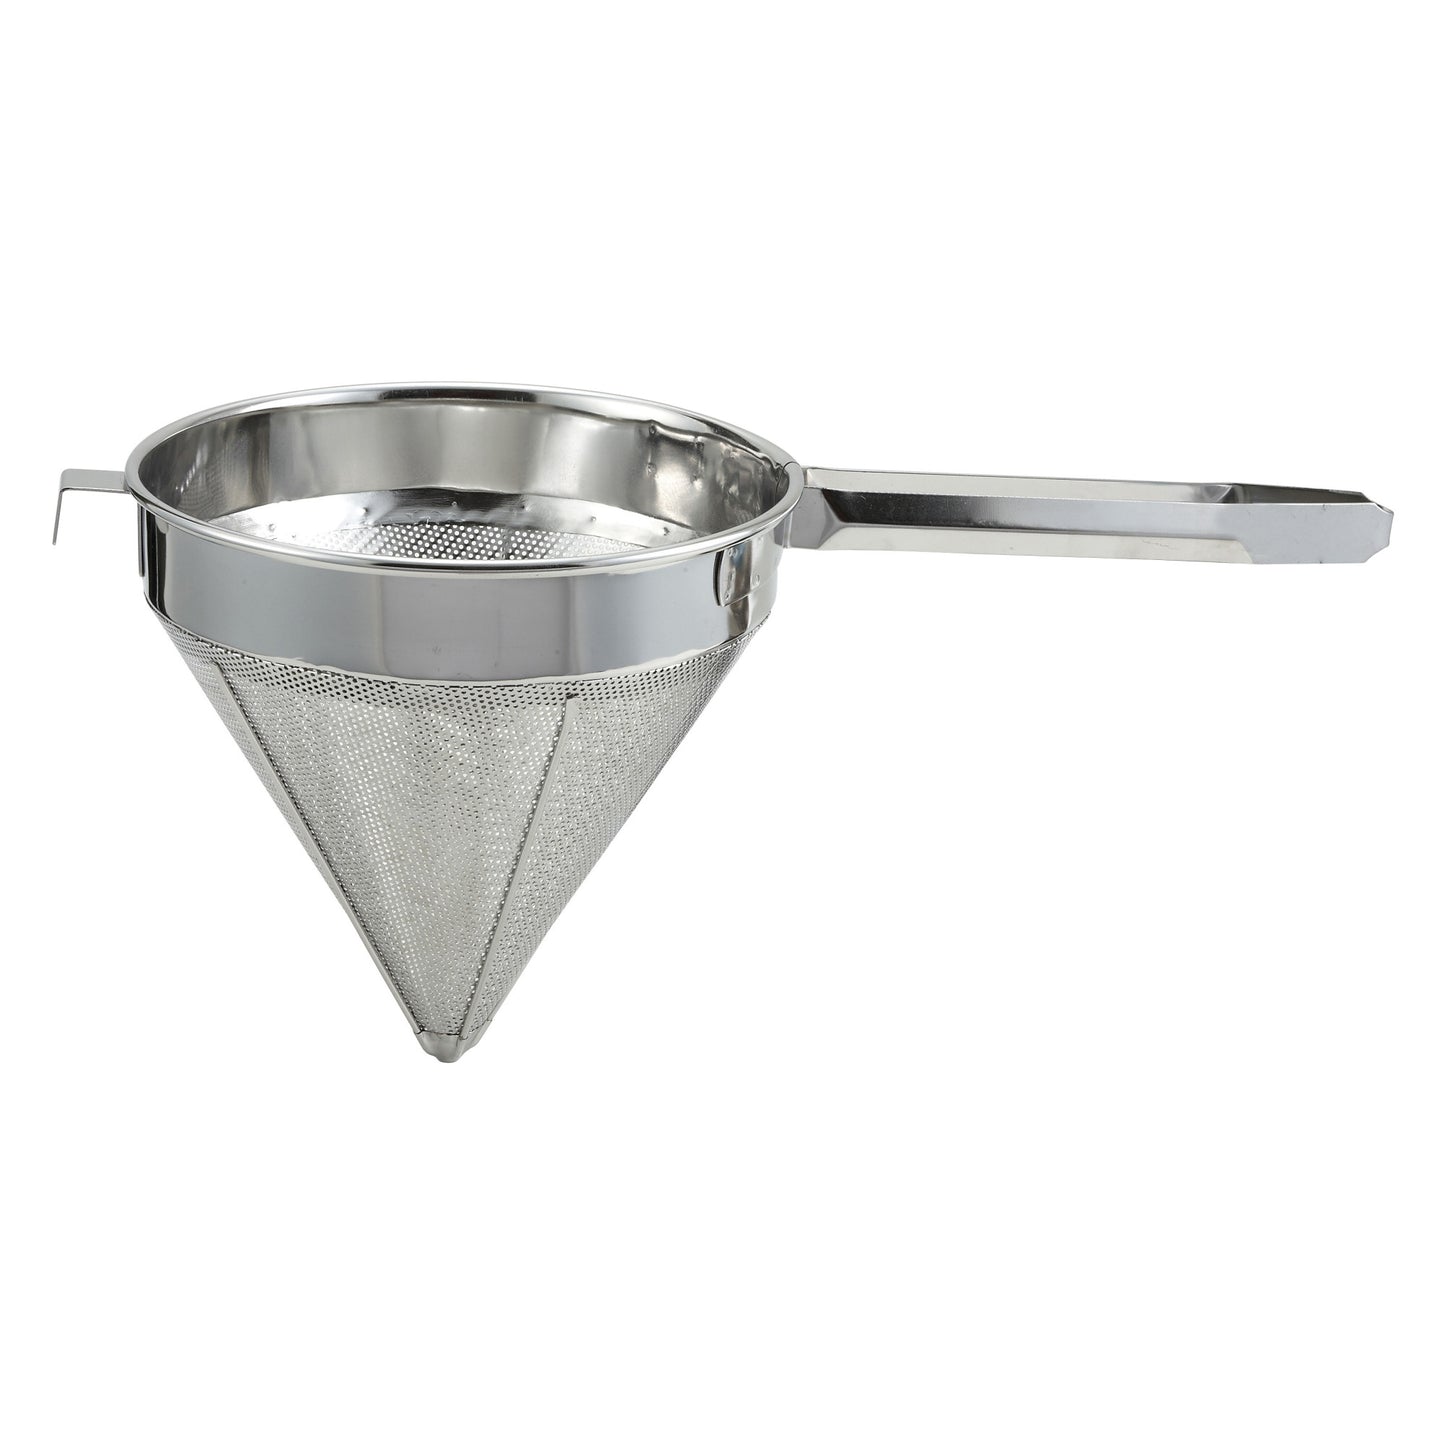 CCS-8F - Stainless Steel China Cap Strainer - 8", Fine